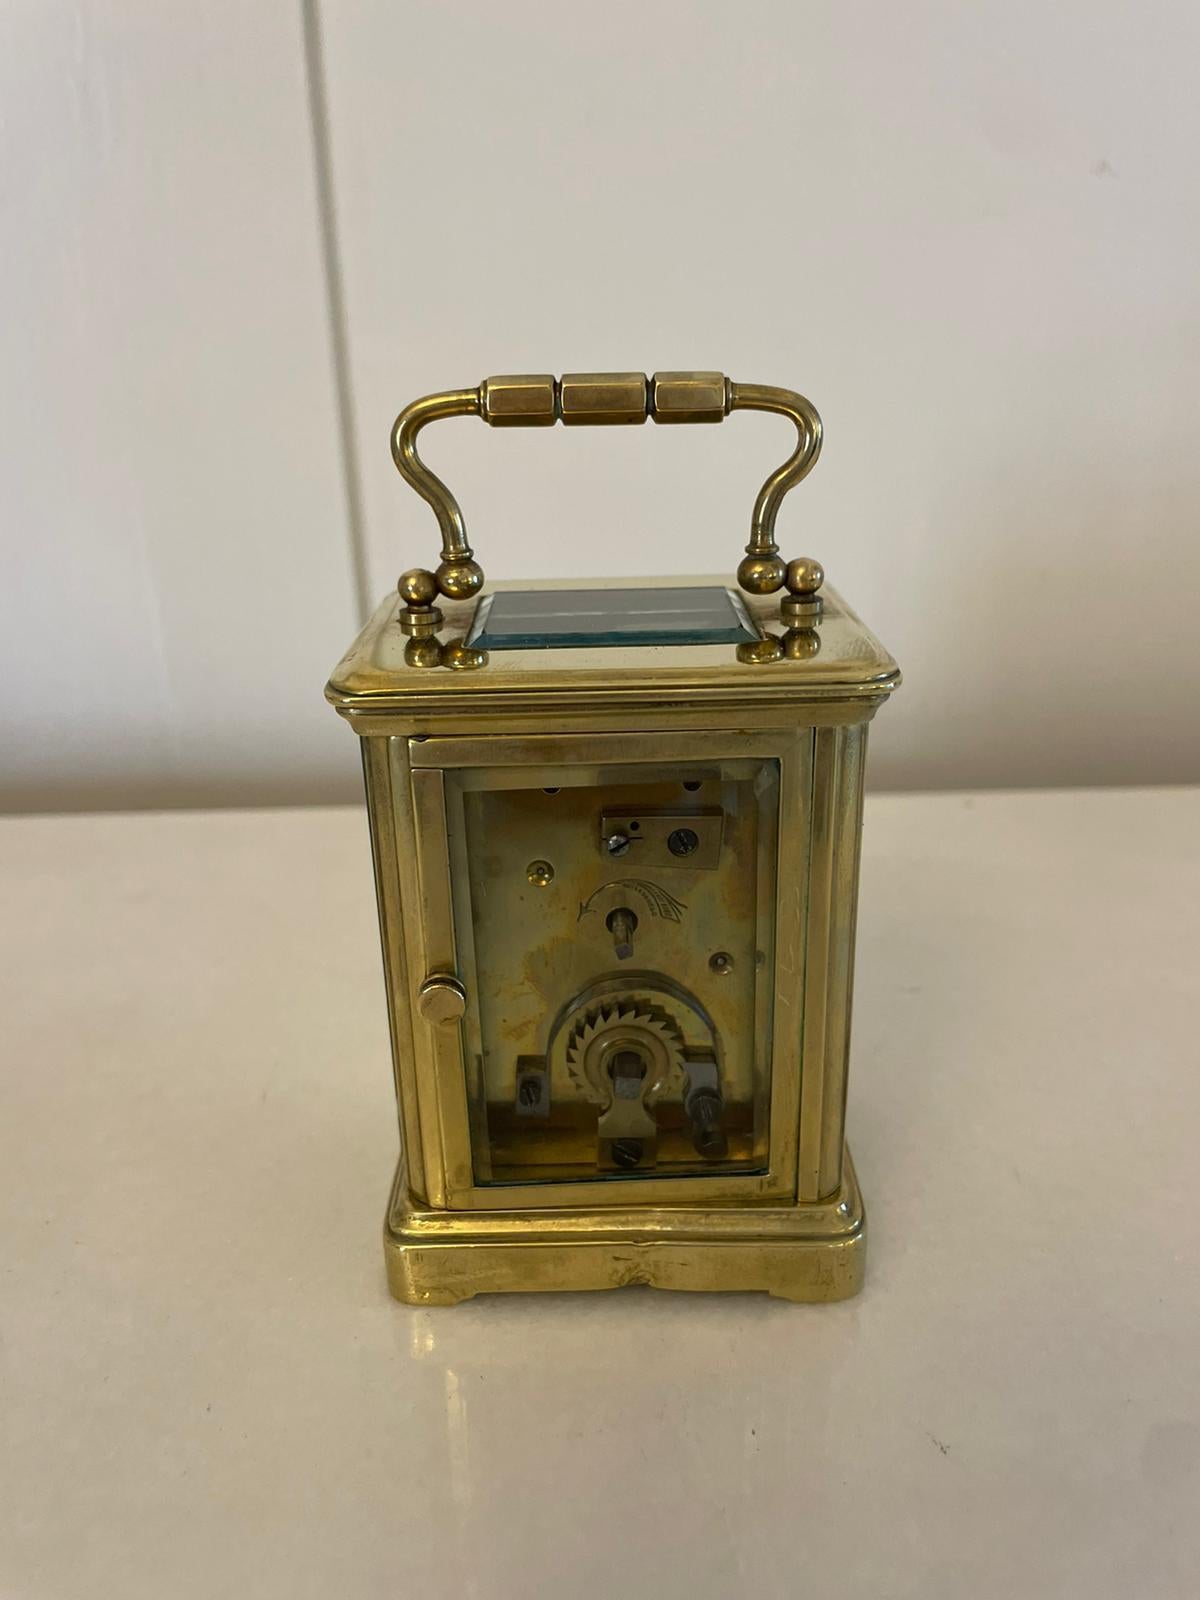 Antique Victorian quality miniature brass carriage clock having a quality brass carriage clock with bevelled edge, glass panels, white enamel dial with Roman numerals, original hands, 8 day movement and shaped carrying handle to the top